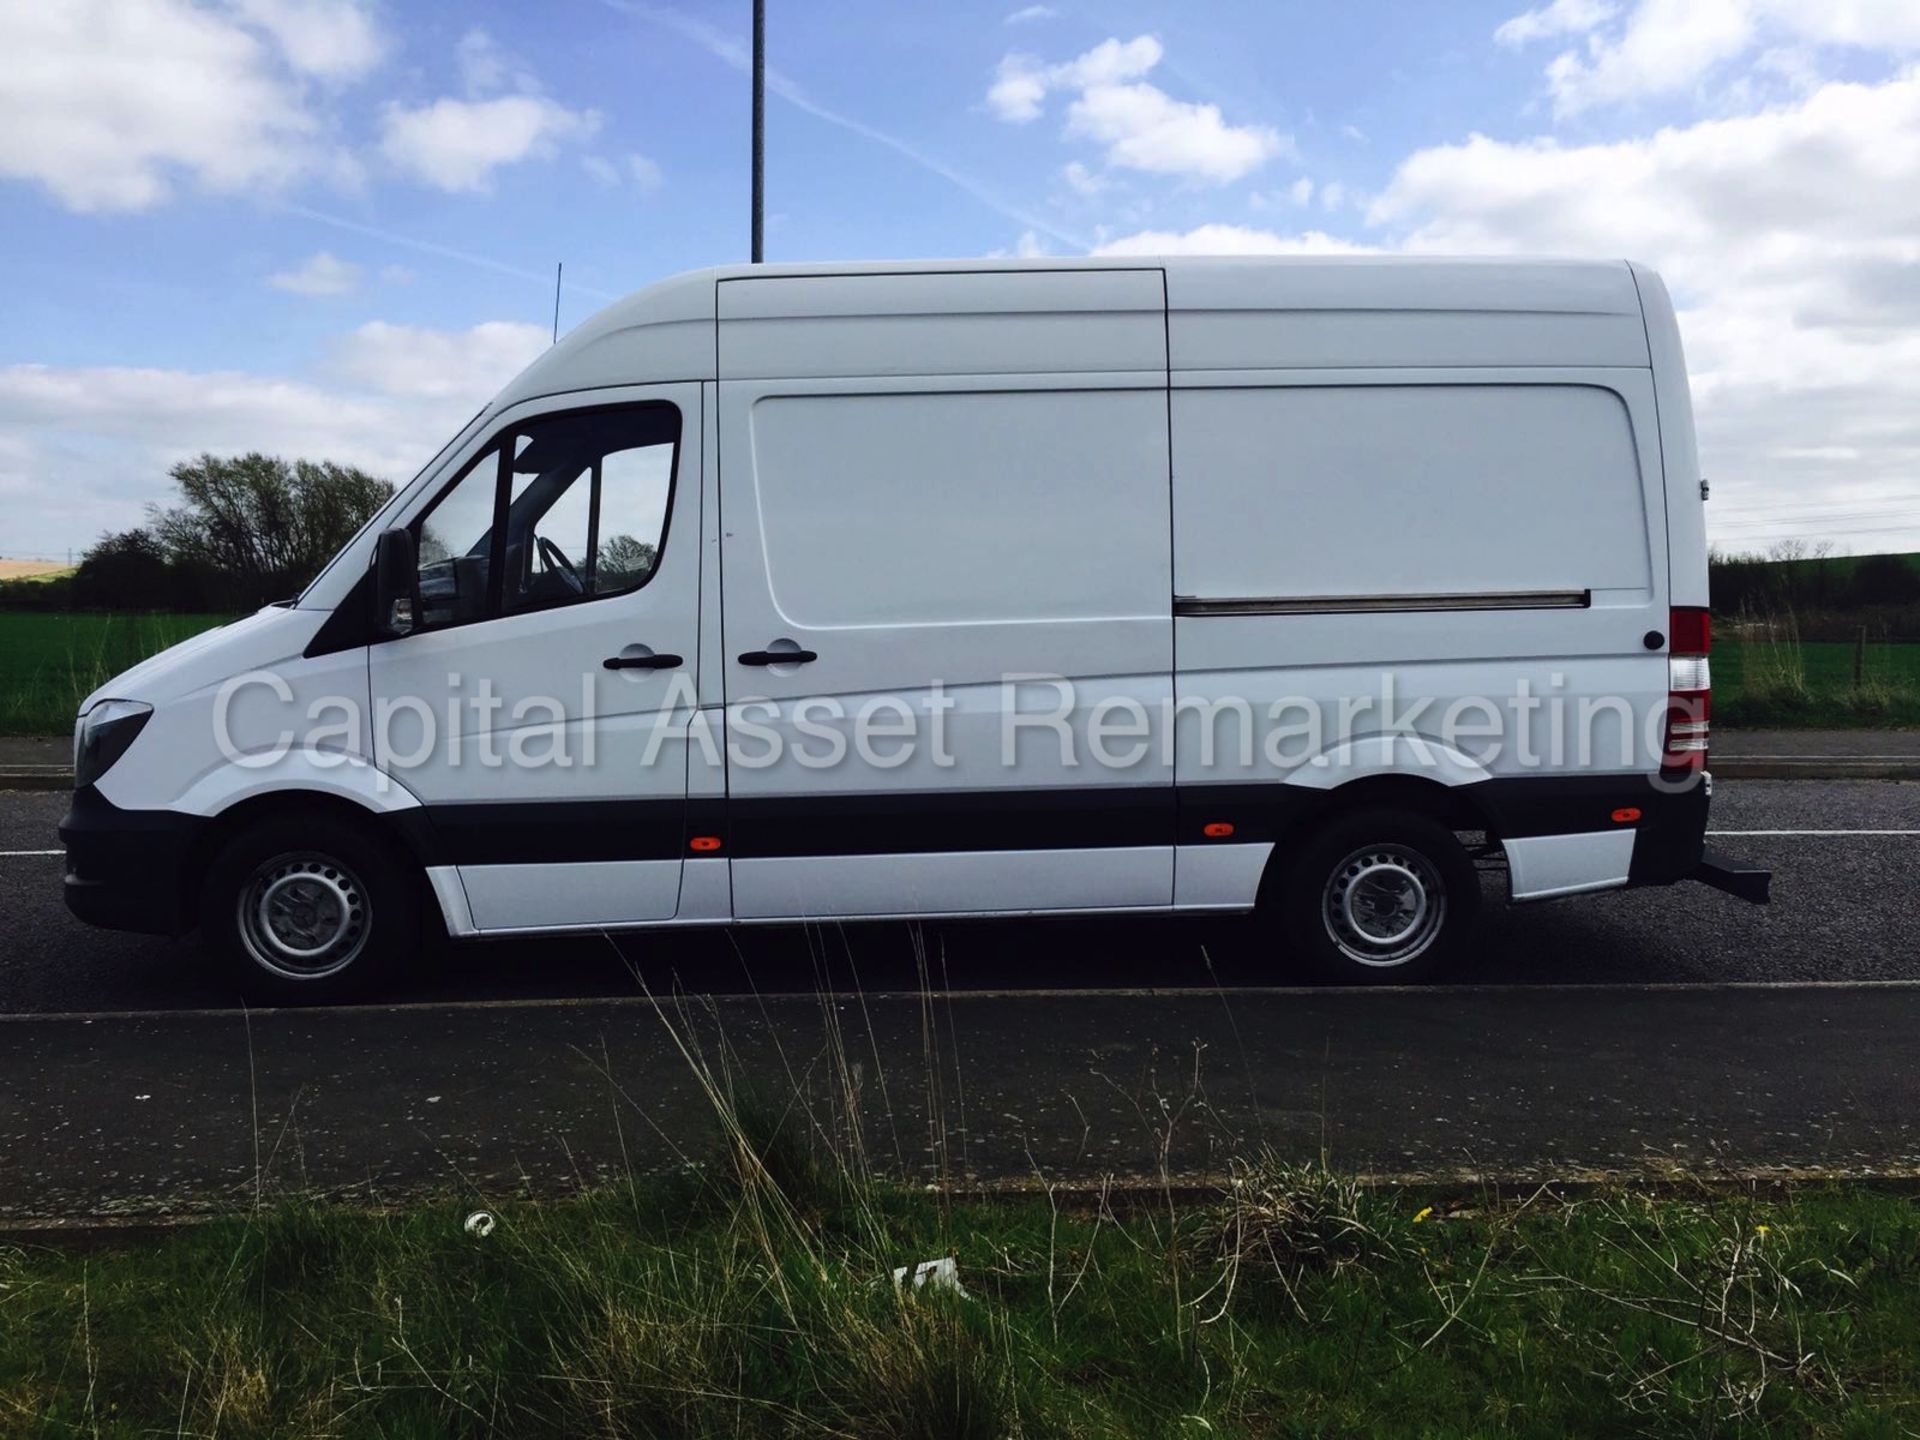 MERCEDES SPRINTER 313CDI "130BHP - 6 SPEED" FACELIFT MODEL / NEW SHAPE (2014 YEAR) 1 OWNER - Image 4 of 11